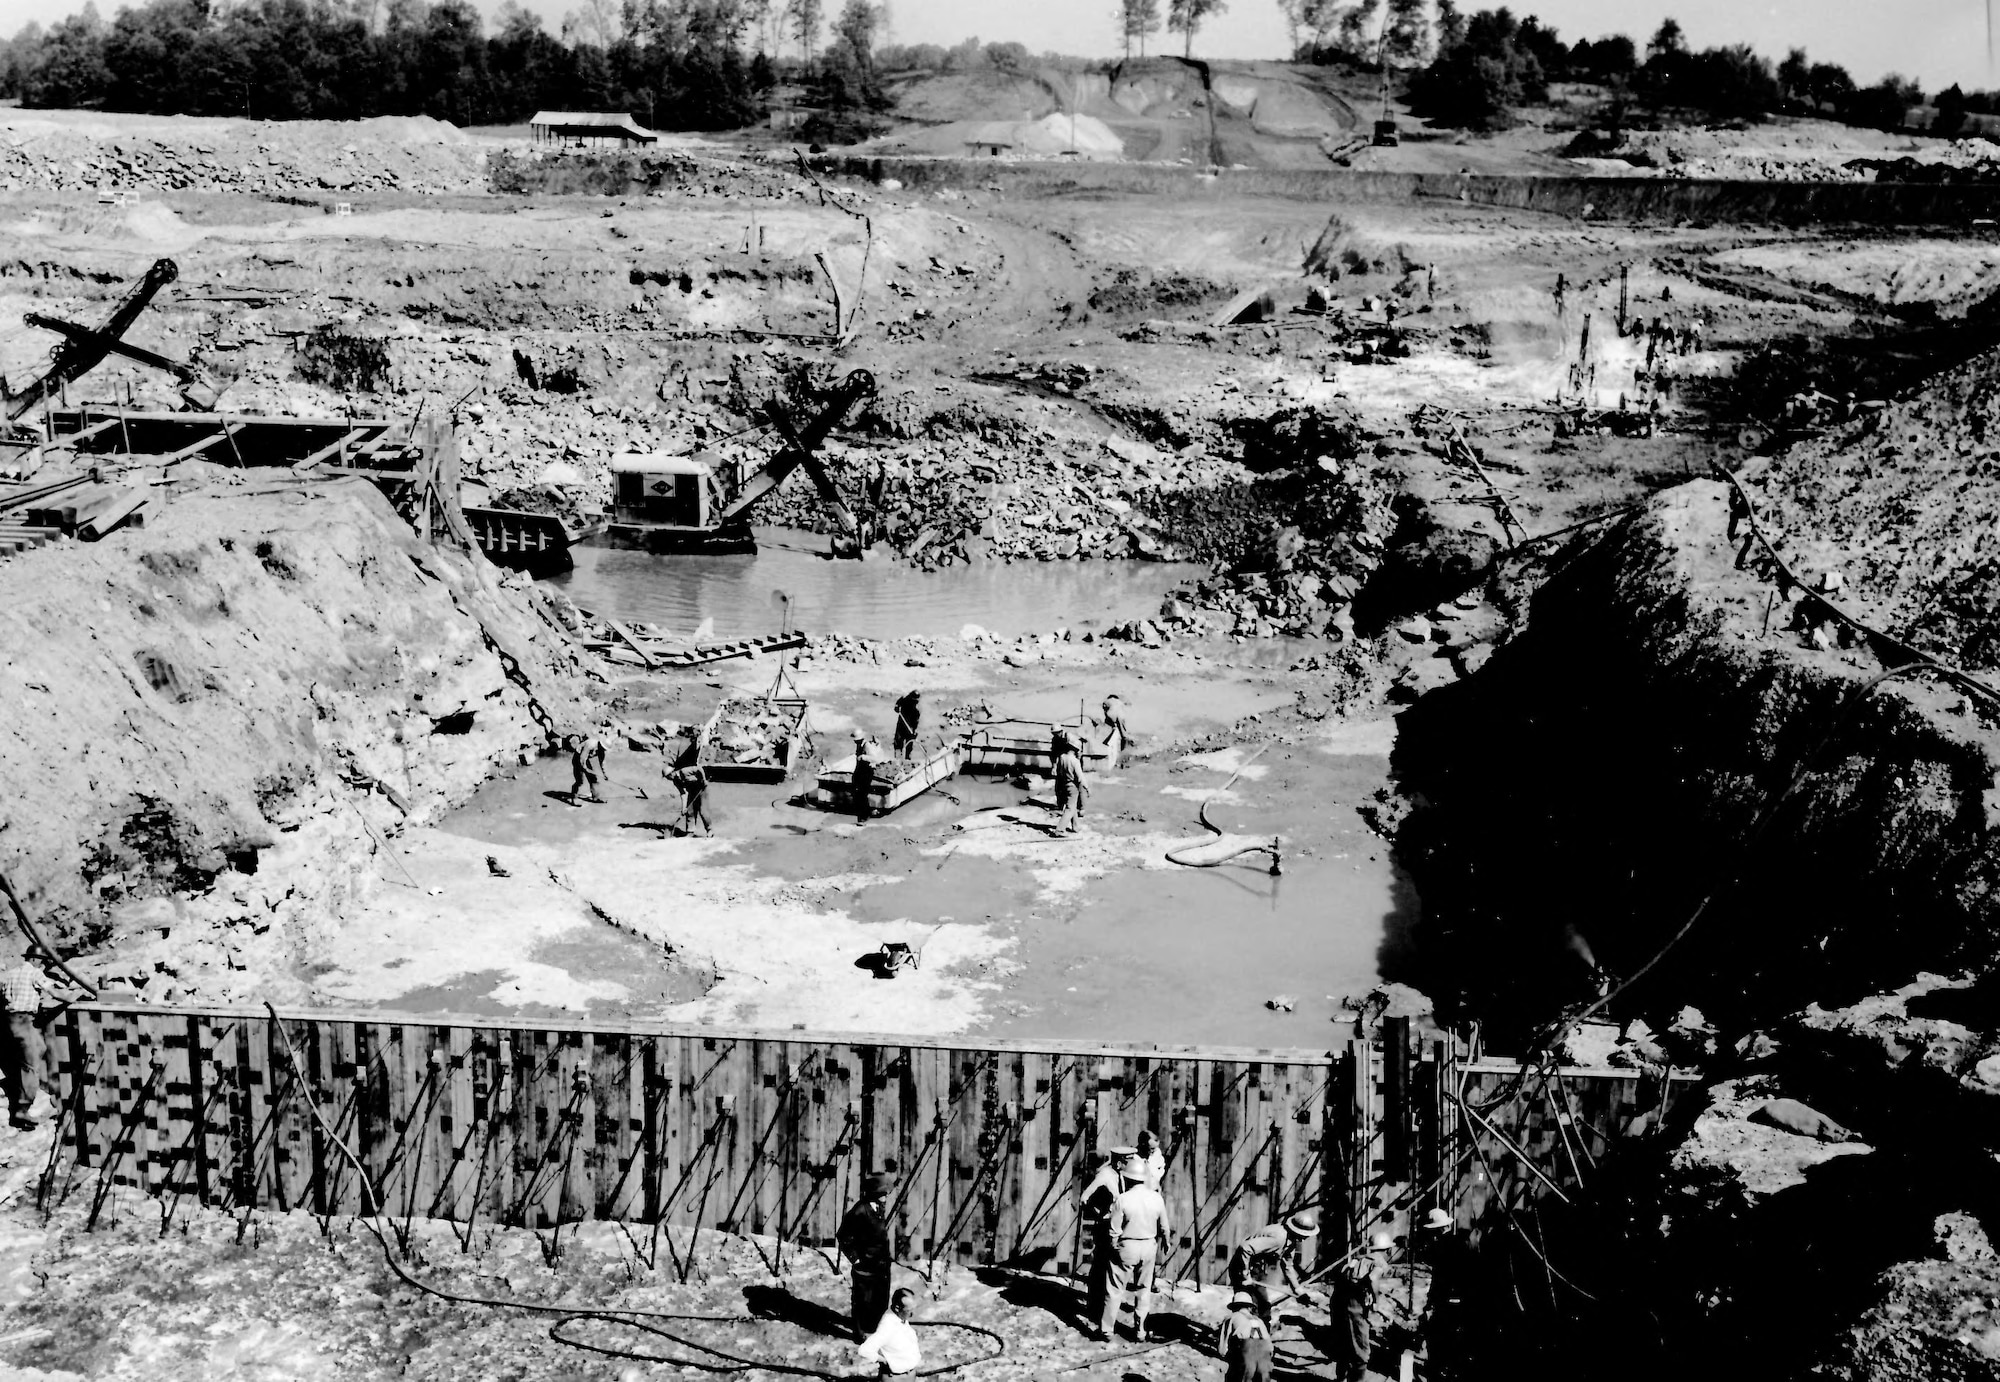 Progress on the spillway section of the Elk River Dam is seen in this photo from May 1951. Construction of the dam, built to create Woods Reservoir, was completed 70 years ago this month. Since that time, Woods Reservoir has supplied cooling water to the test facilities at Arnold Air Force Base, Tennessee. Arnold AFB is the headquarters of the Arnold Engineering Development Complex. (U.S. Air Force photo)